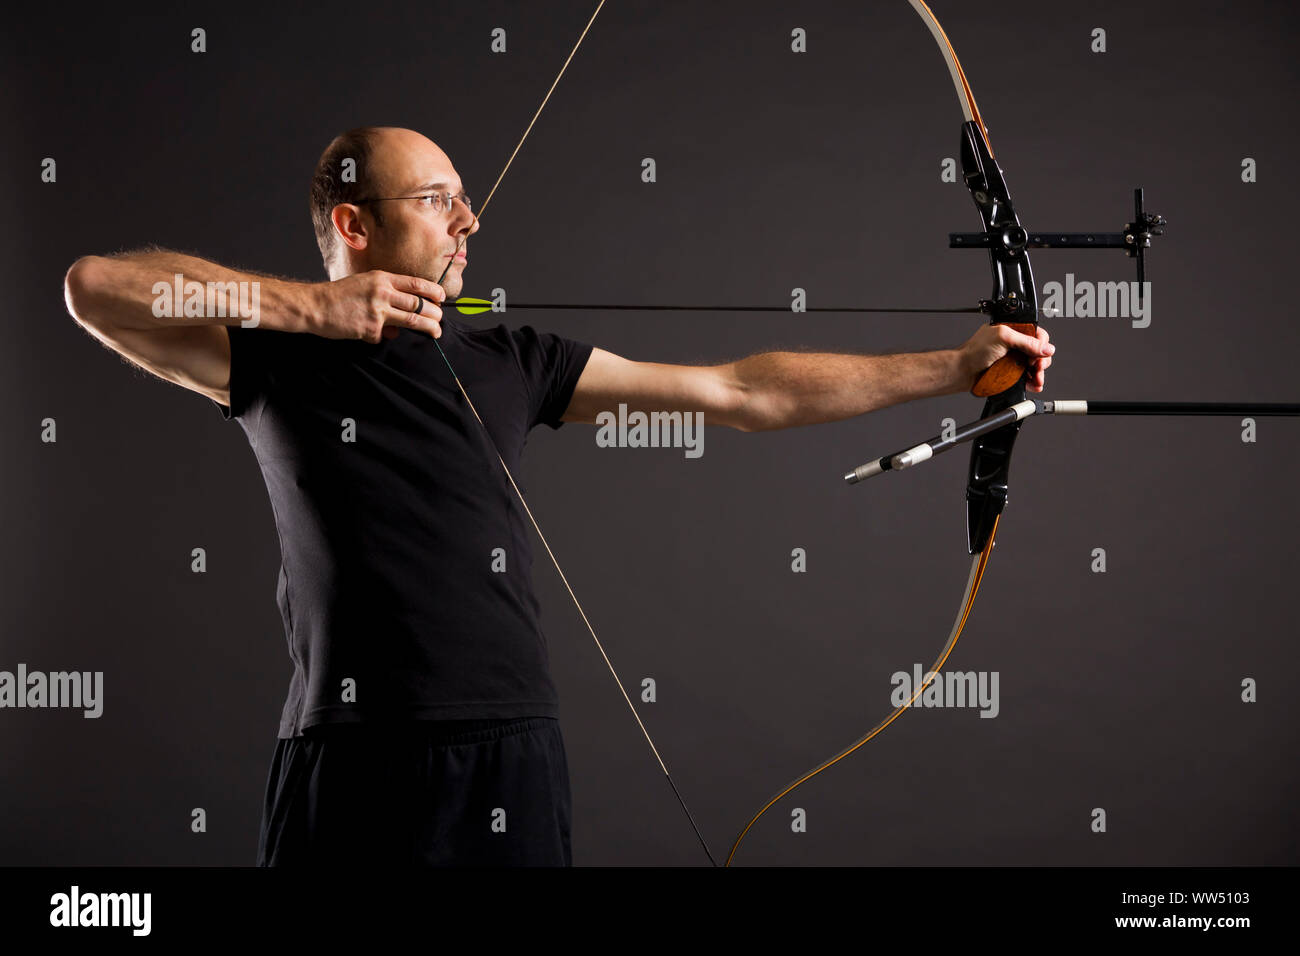 Profile of bowman with bow and arrow. Stock Photo